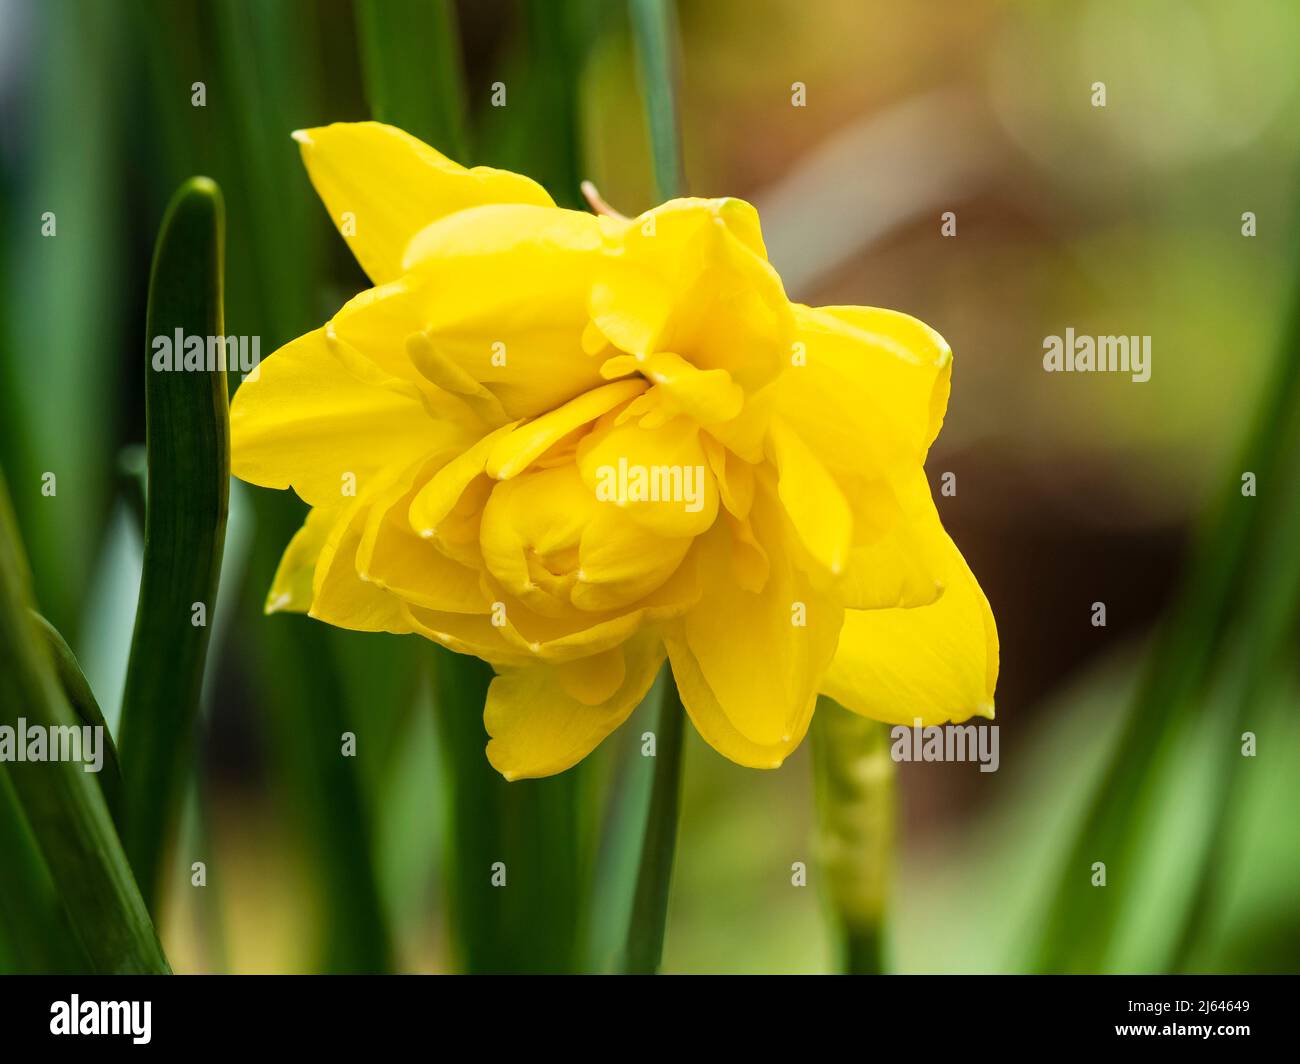 Double yellow flower of the small statured Queen Anne's heirloom daffodil, Narcissus 'Pencrebar' Stock Photo